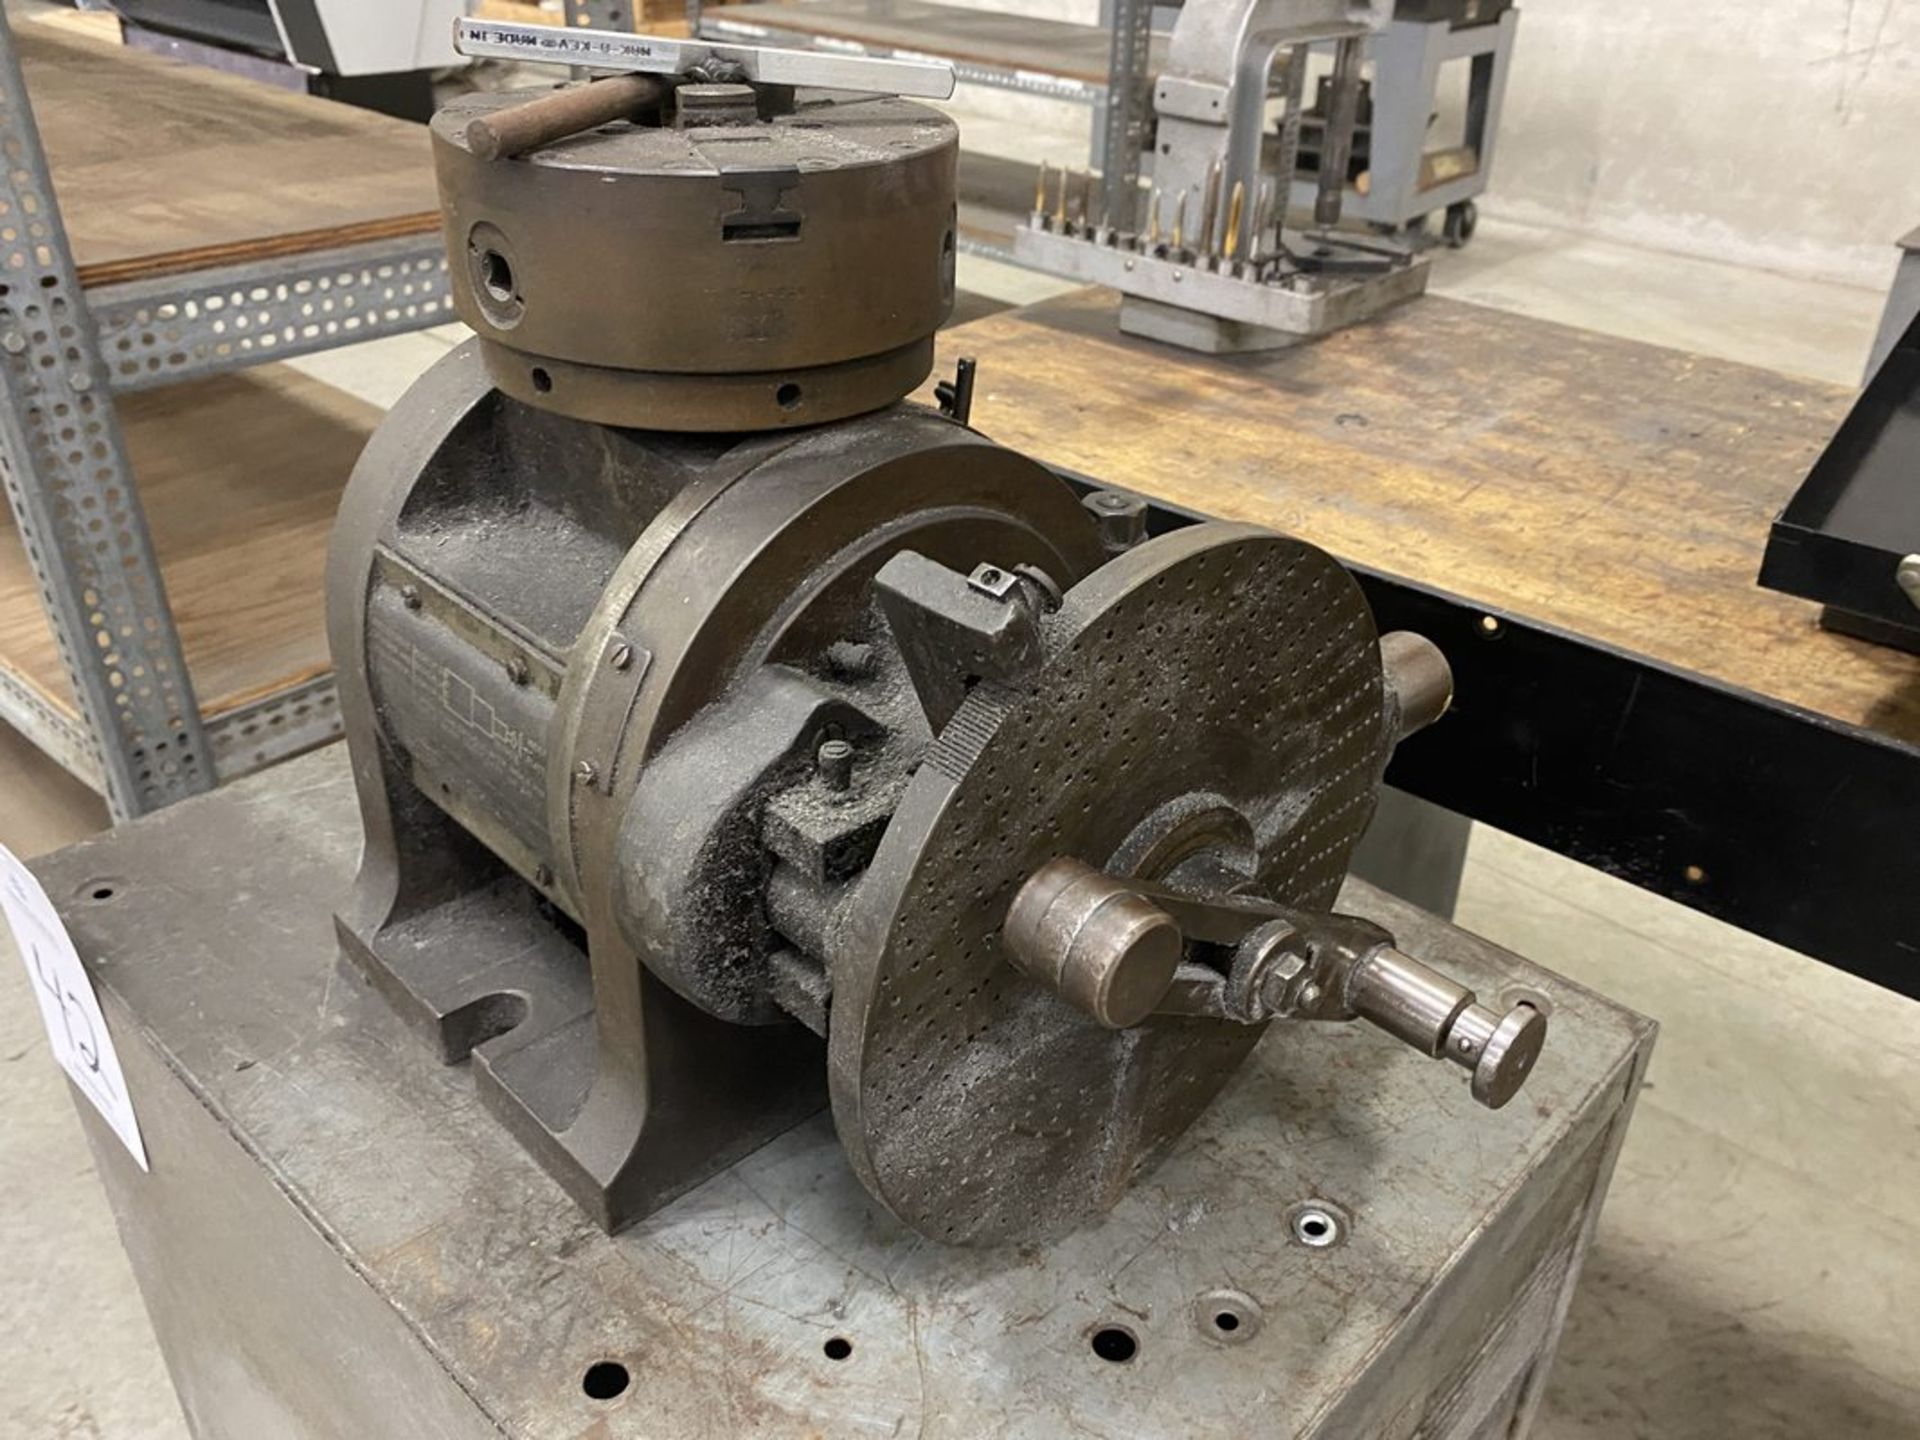 Cincinnati 6" Dividing Head with Cabinet, 3-Jaw Chuck - Image 2 of 4